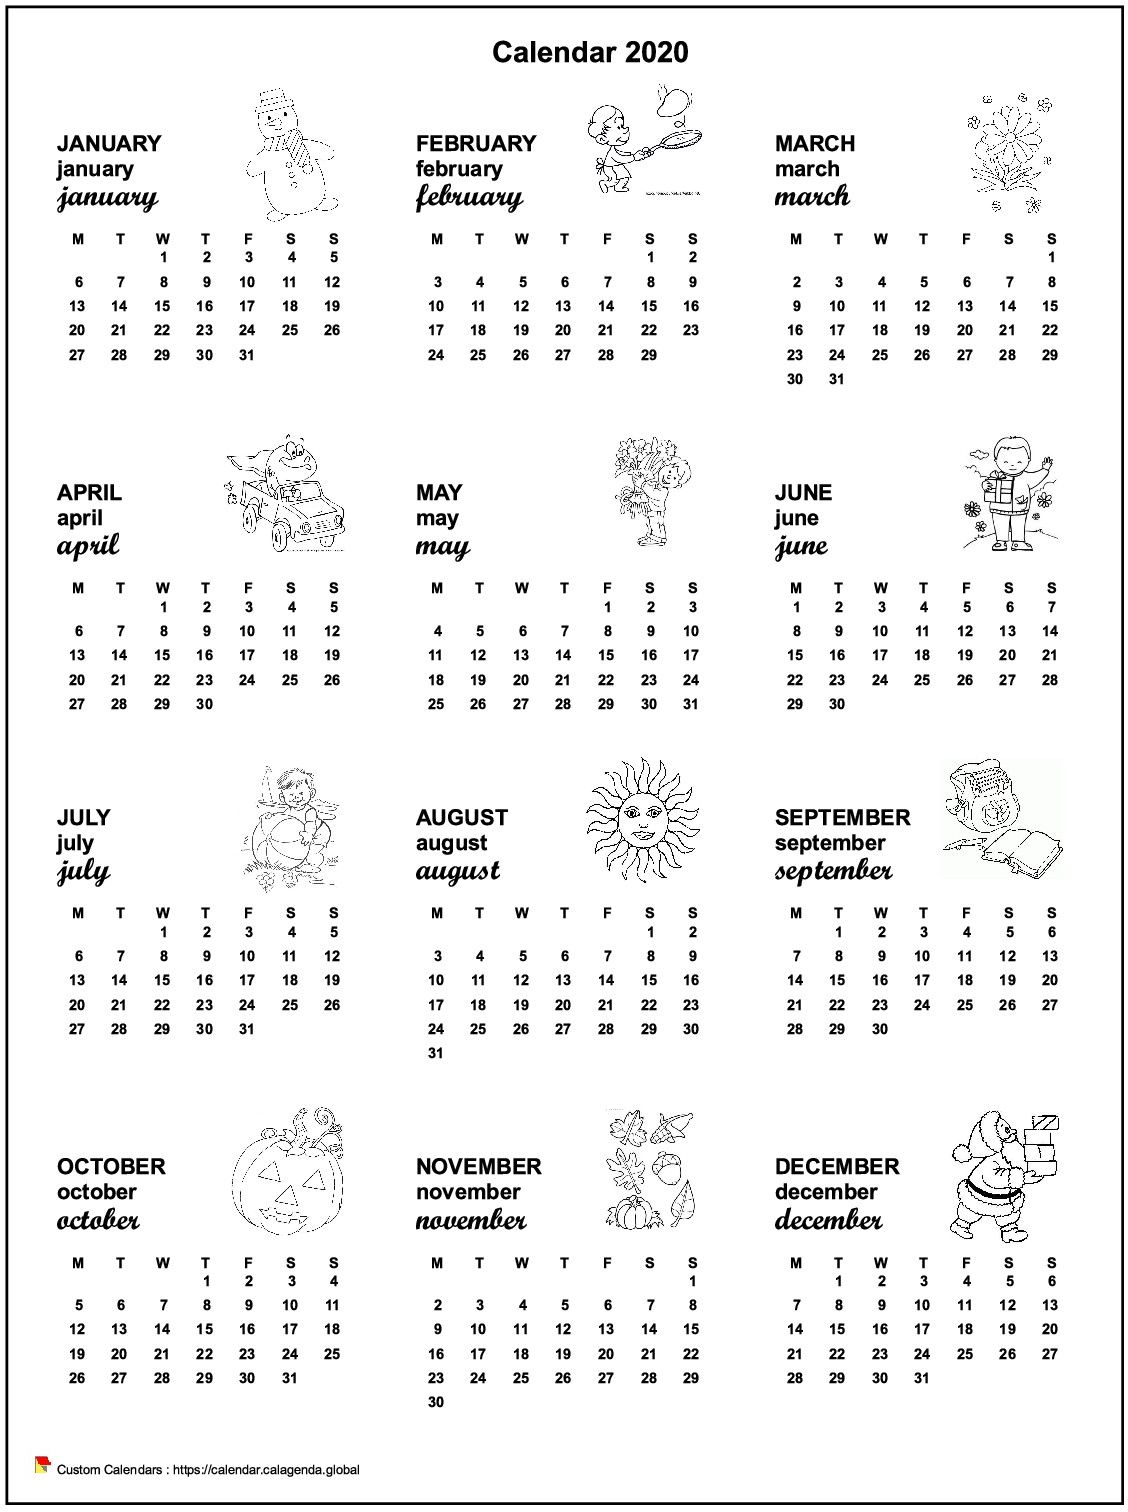 Calendar 2030 annual maternal and primary school